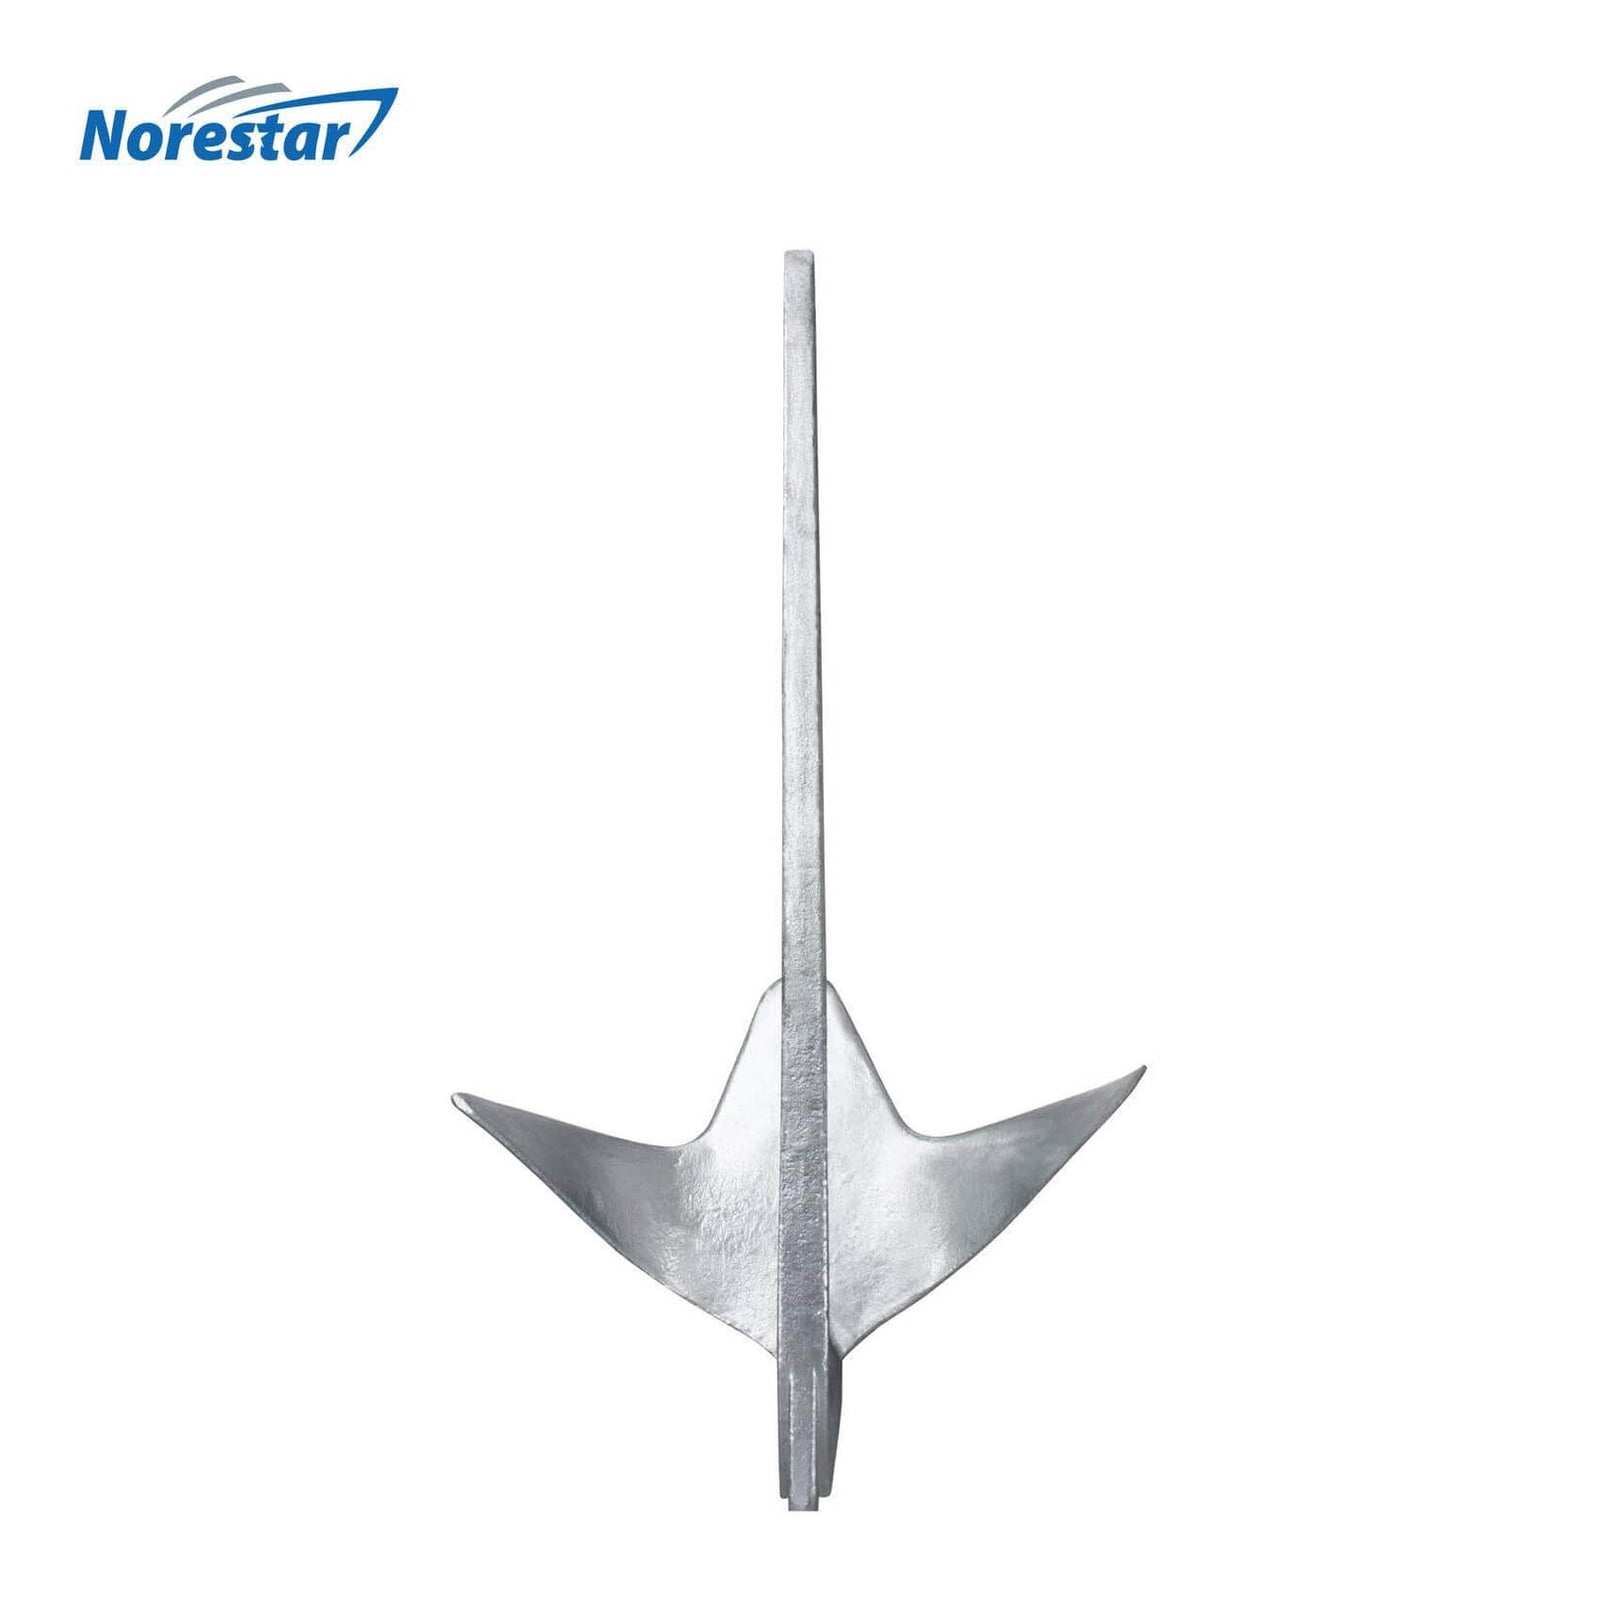 Galvanized Steel Bruce/Claw Boat Anchor by Norestar - Top